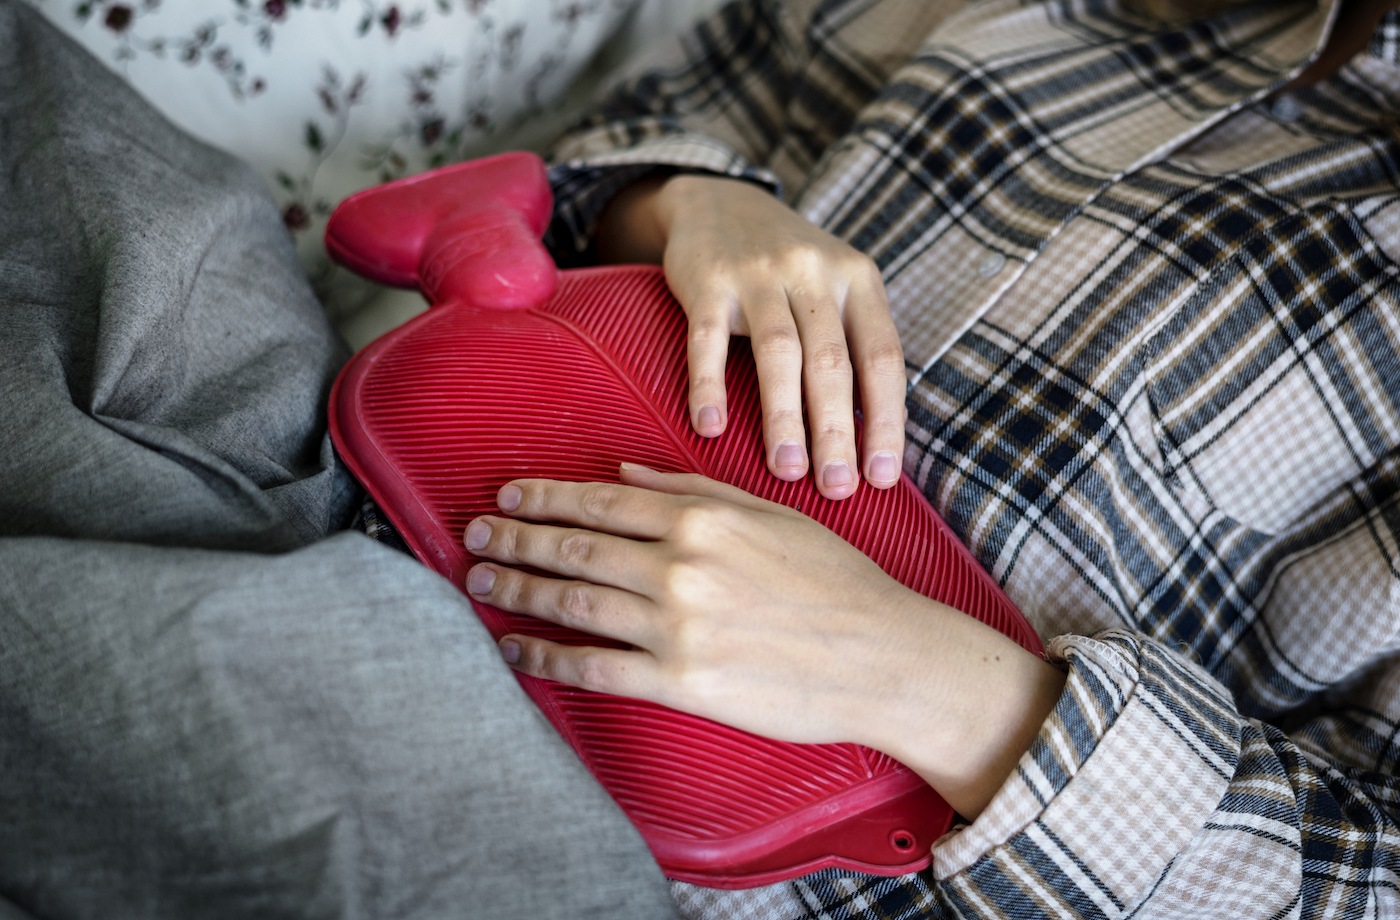 pms back pain woman holding hot water bottle over stomach